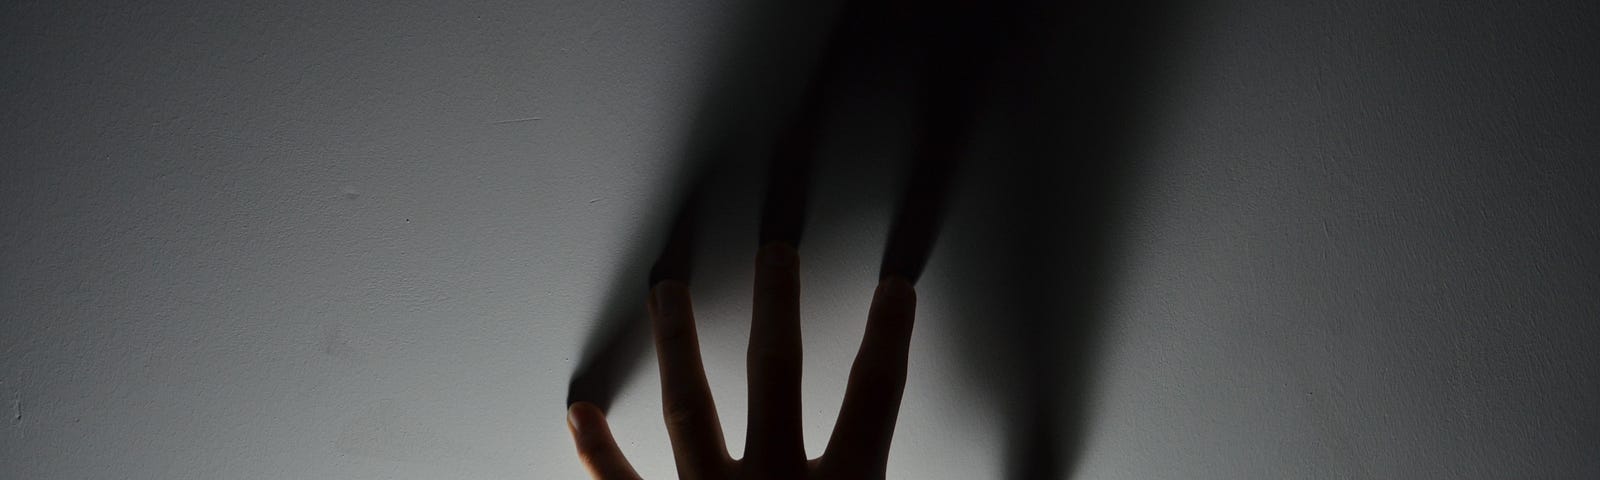 The silhouette of a hand reaching out.